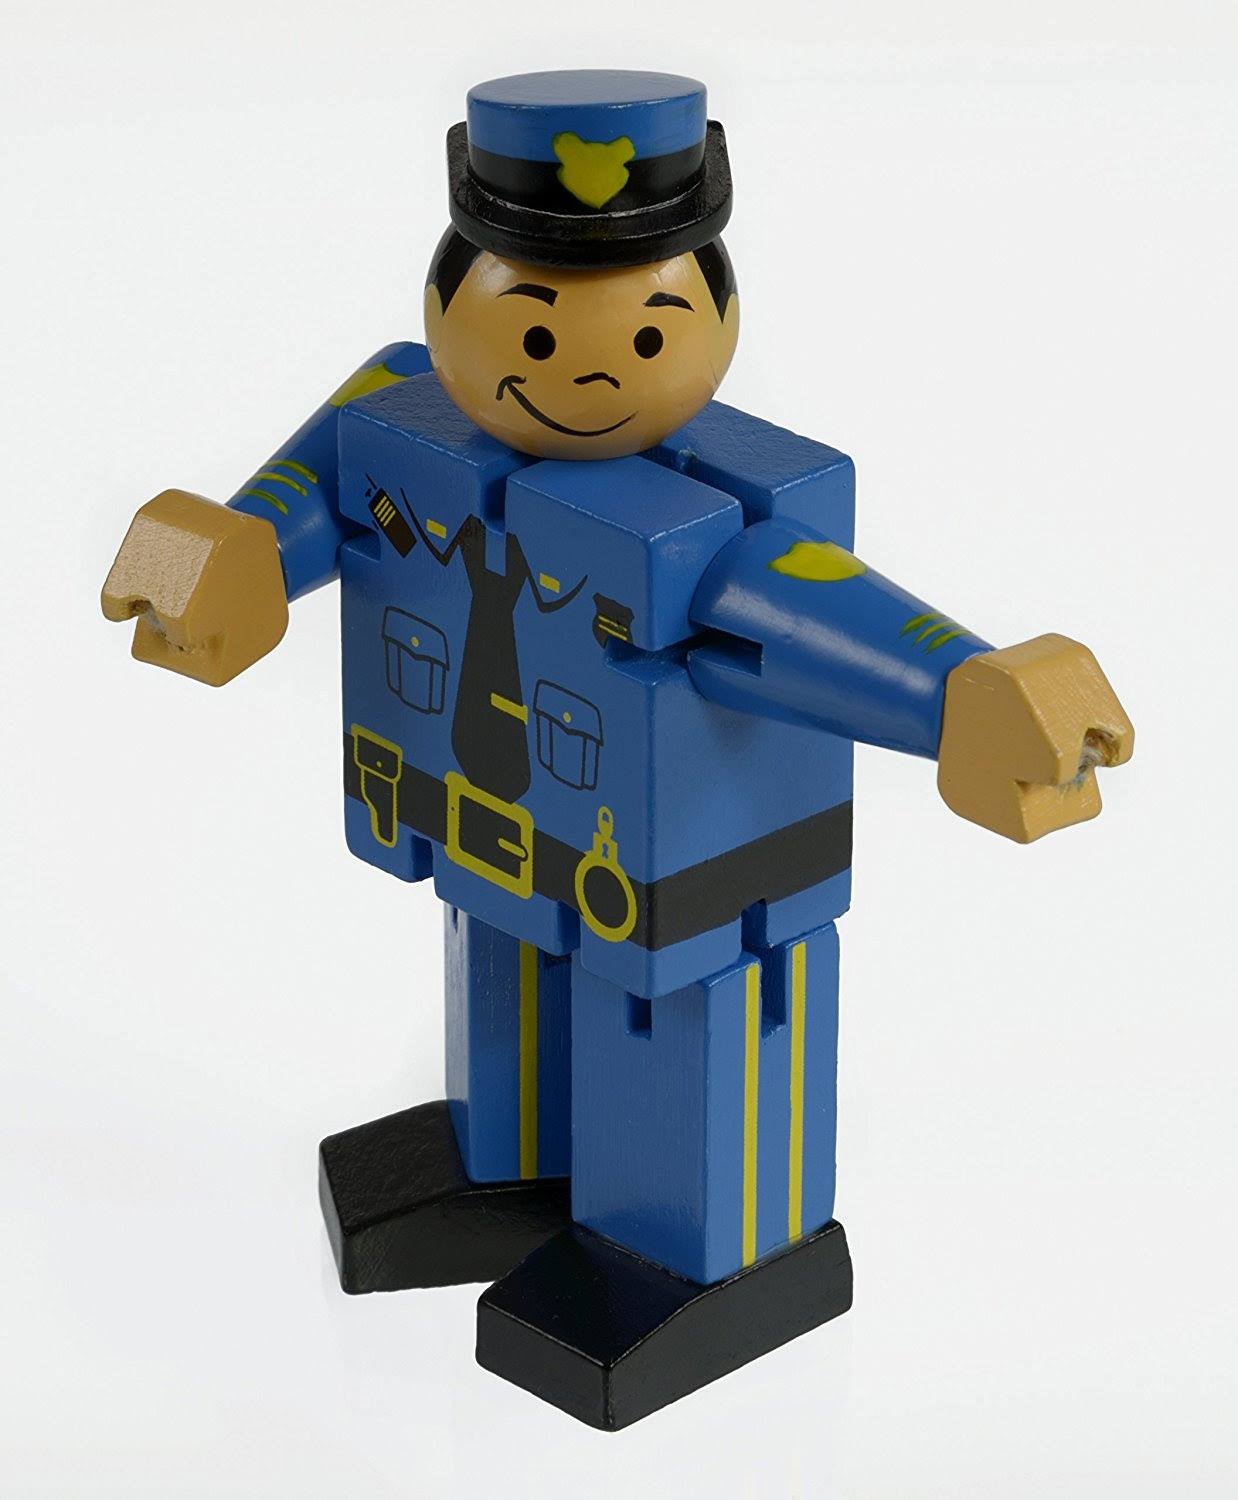 The Original Toy Company Wooden Policeman Fidget Toy For Kids